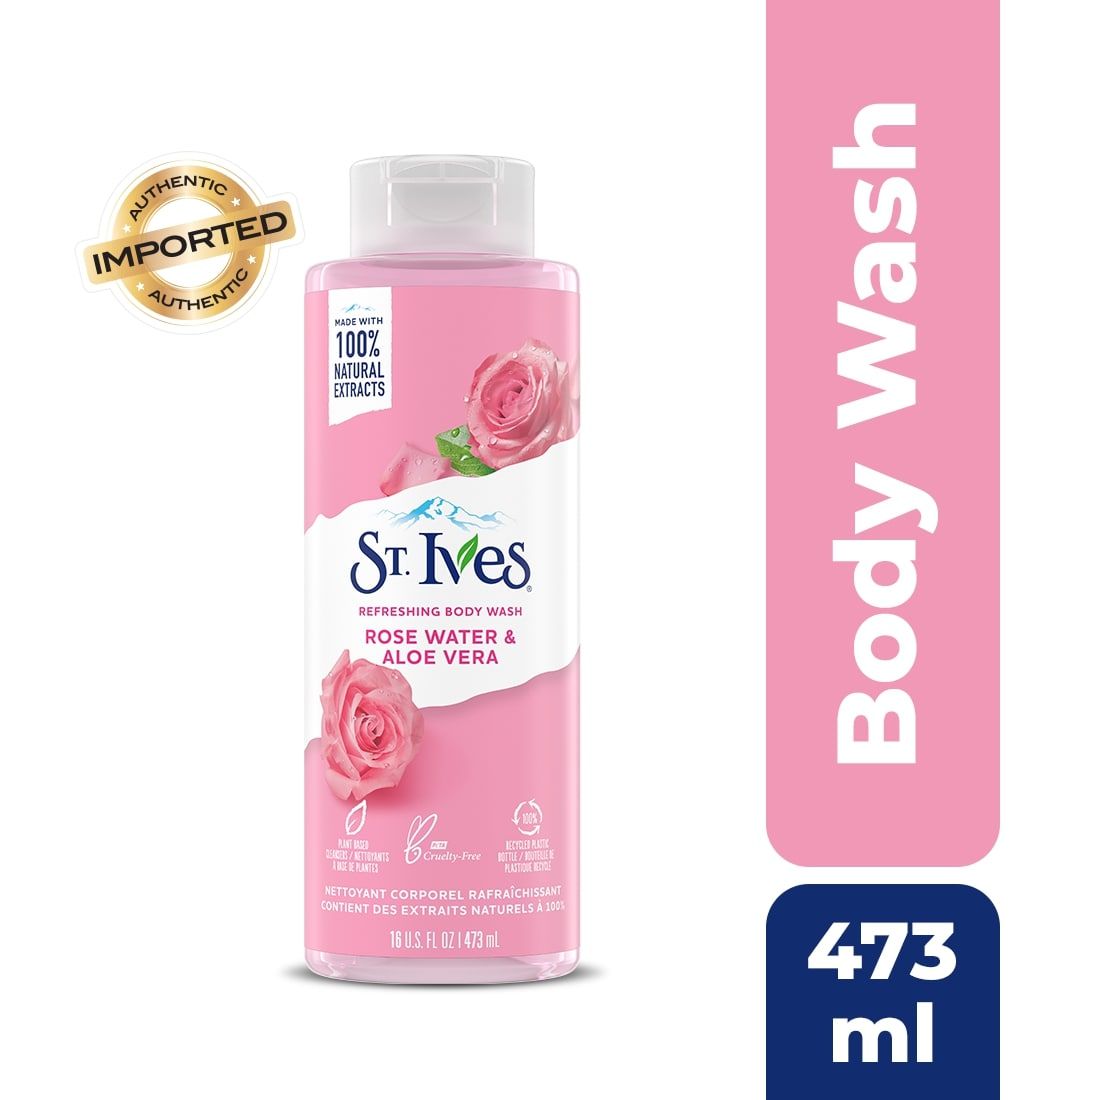 St. Ives Refreshing Rose water & Aloe Vera Flavour Body Wash, 473 ml, Pack of 1 